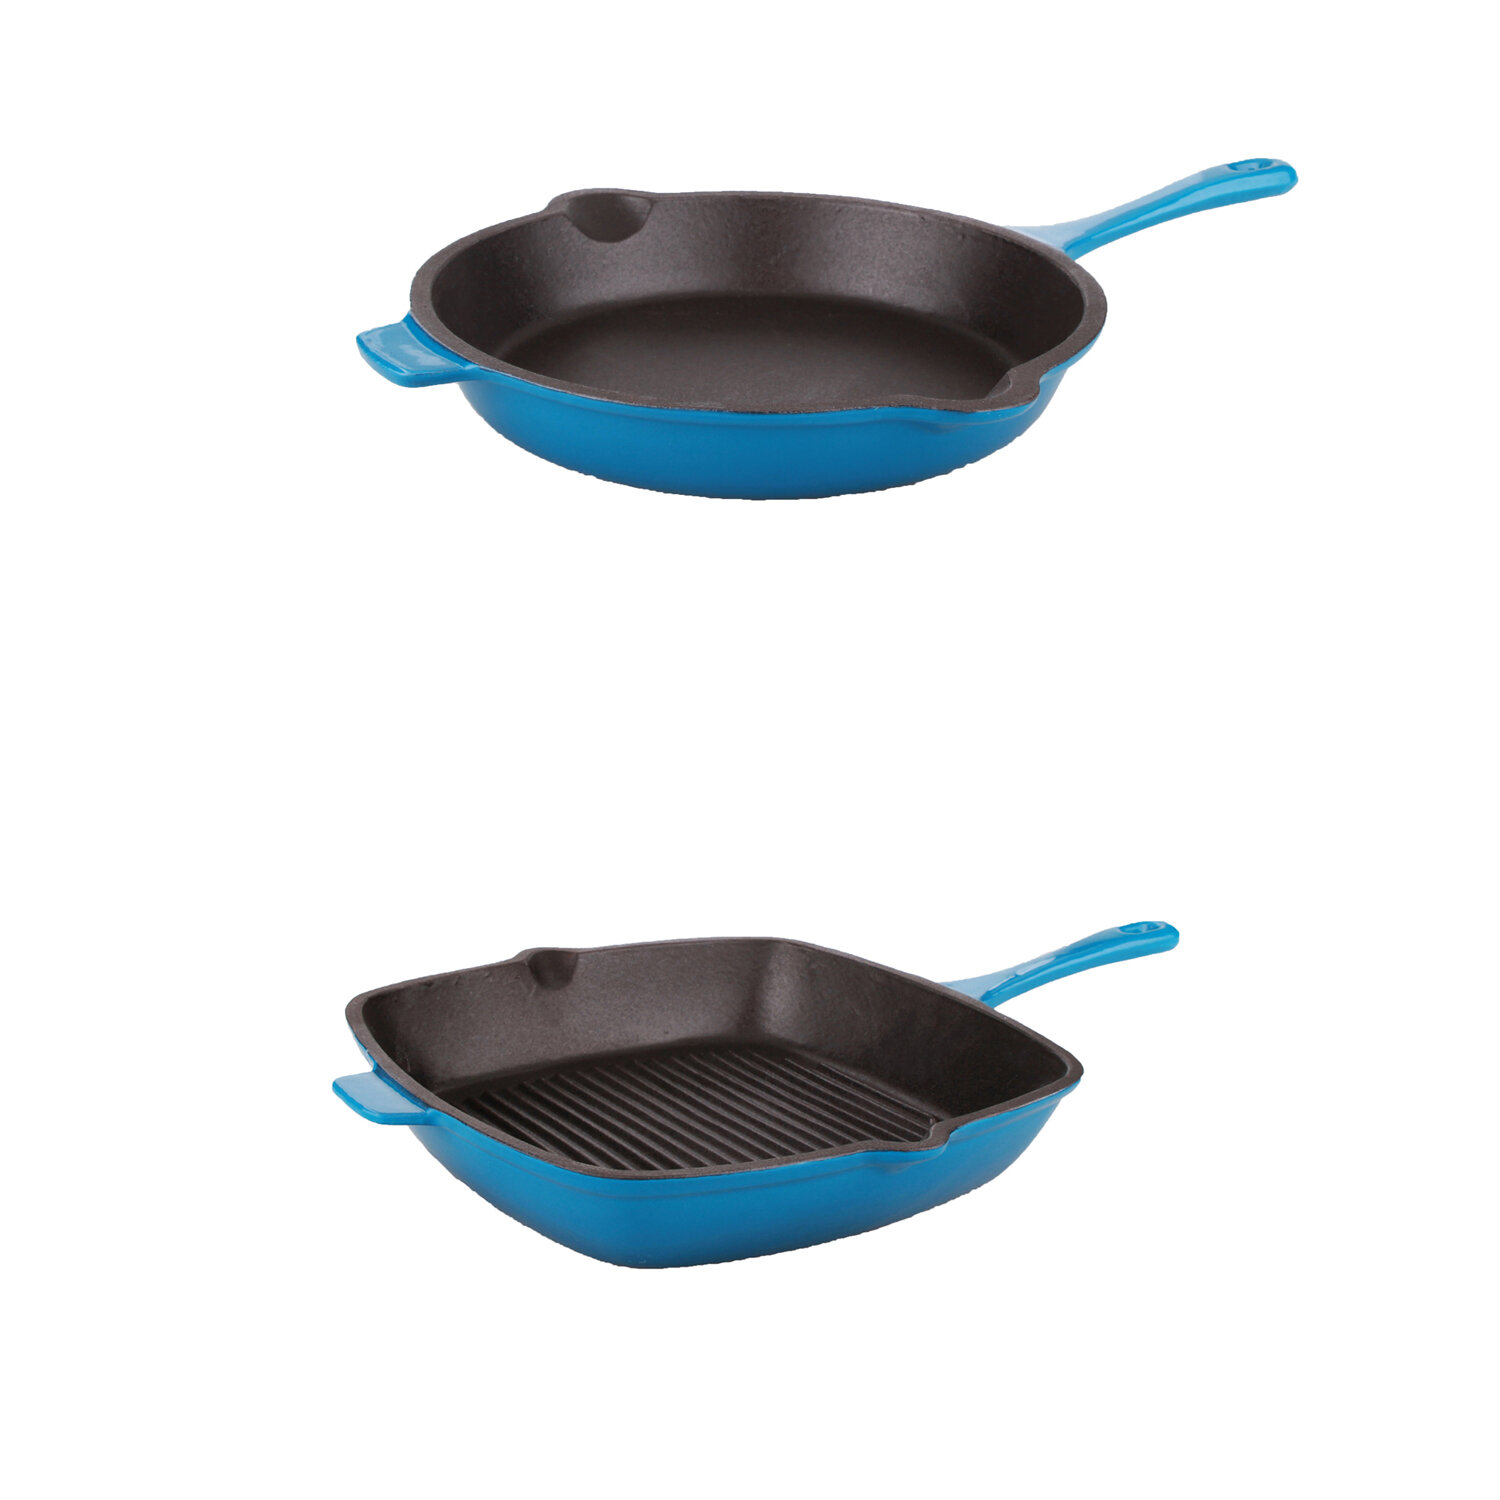 Berghoff Neo Cast Iron Cookware 3 Quart Covered Dutch Oven and 10 Fry Pan,  Set of 2